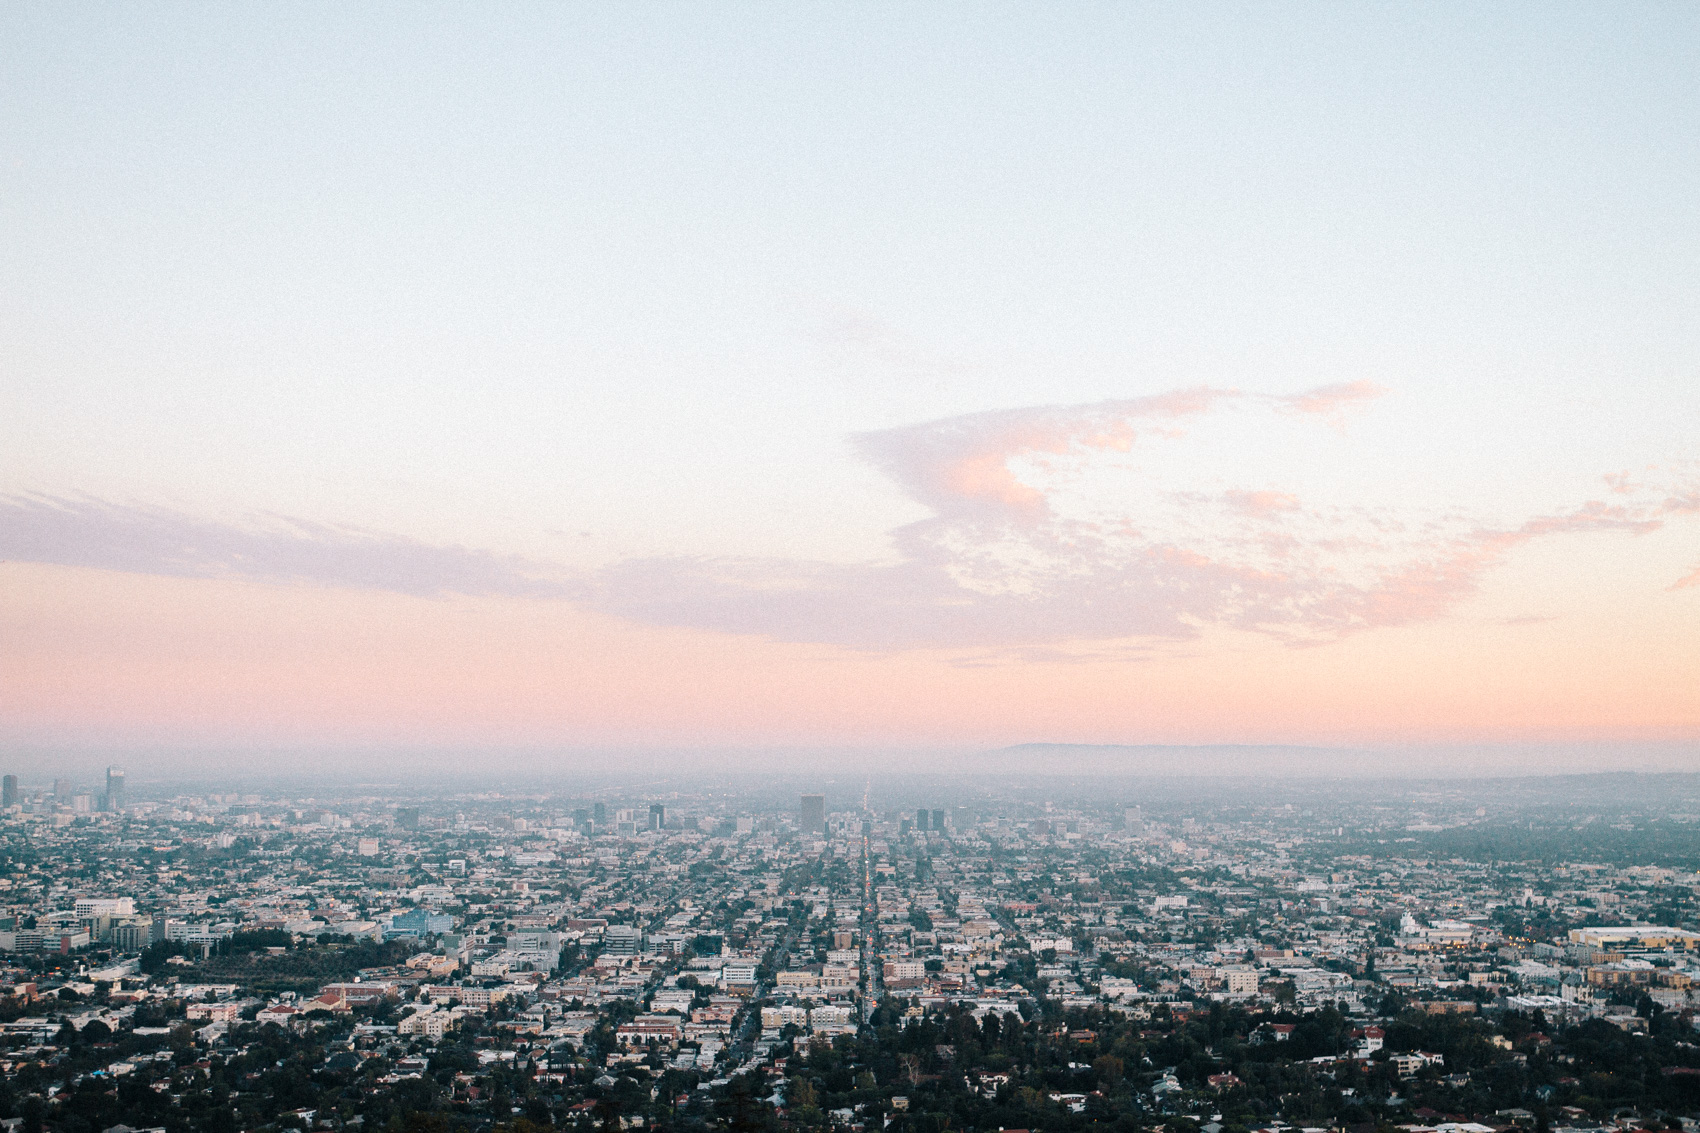 Sprawling city of Los Angeles at sunset as seen from the Griffith Observatory